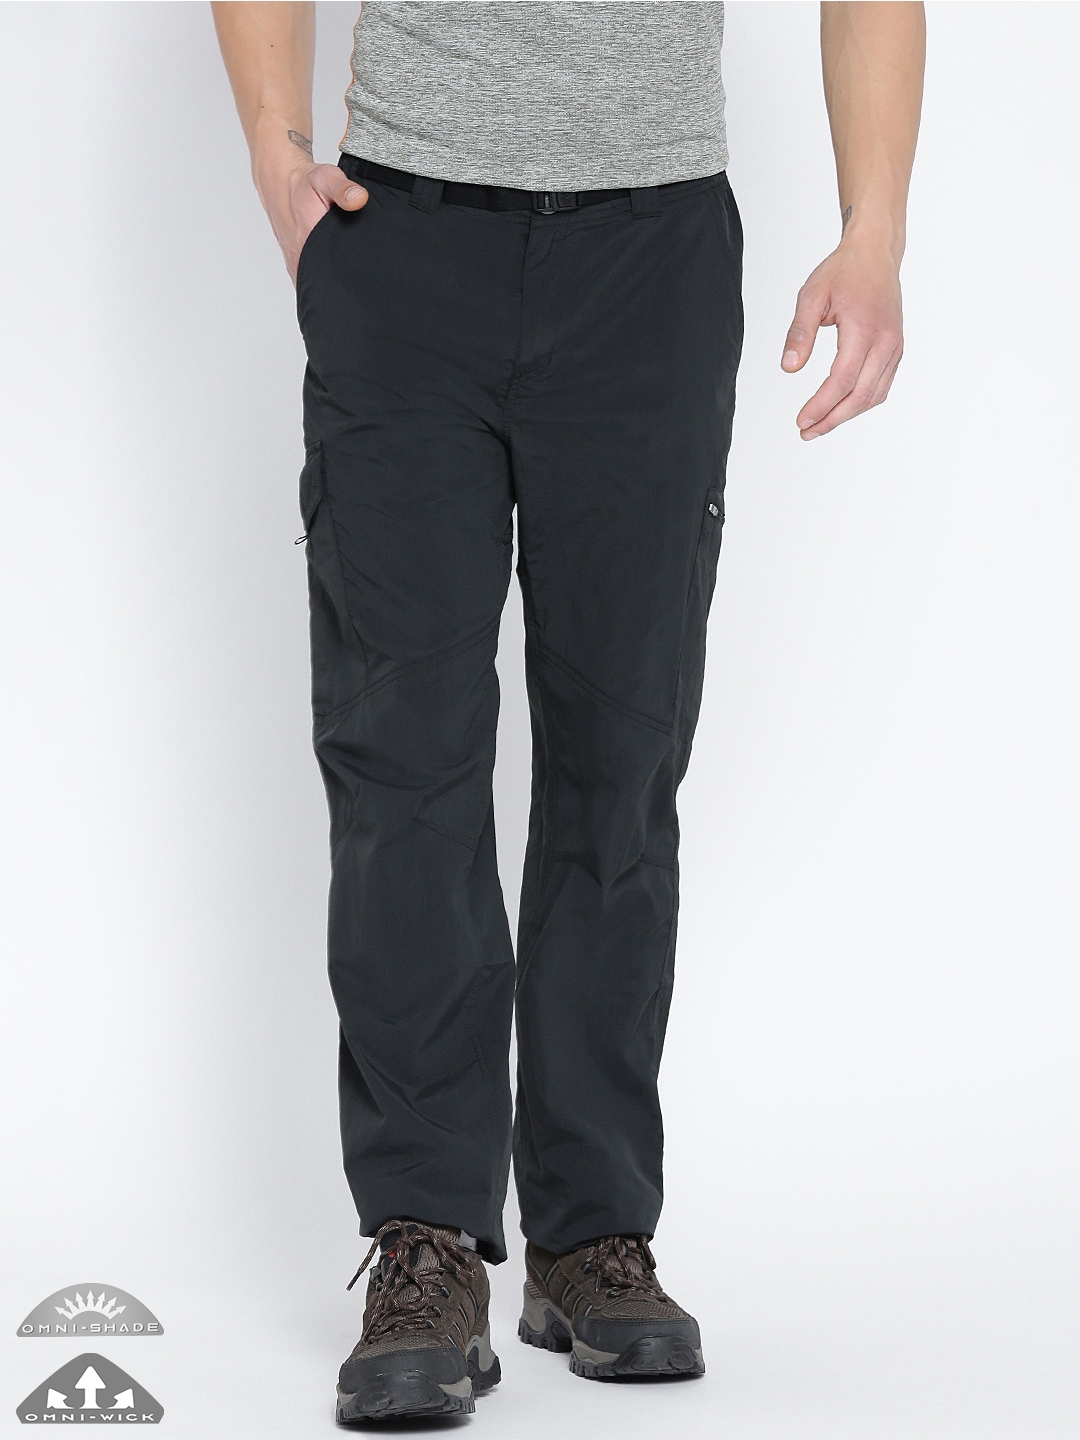 Buy Uber Urban Regular Fit Mens Grey Trousers Online  2499 from ShopClues